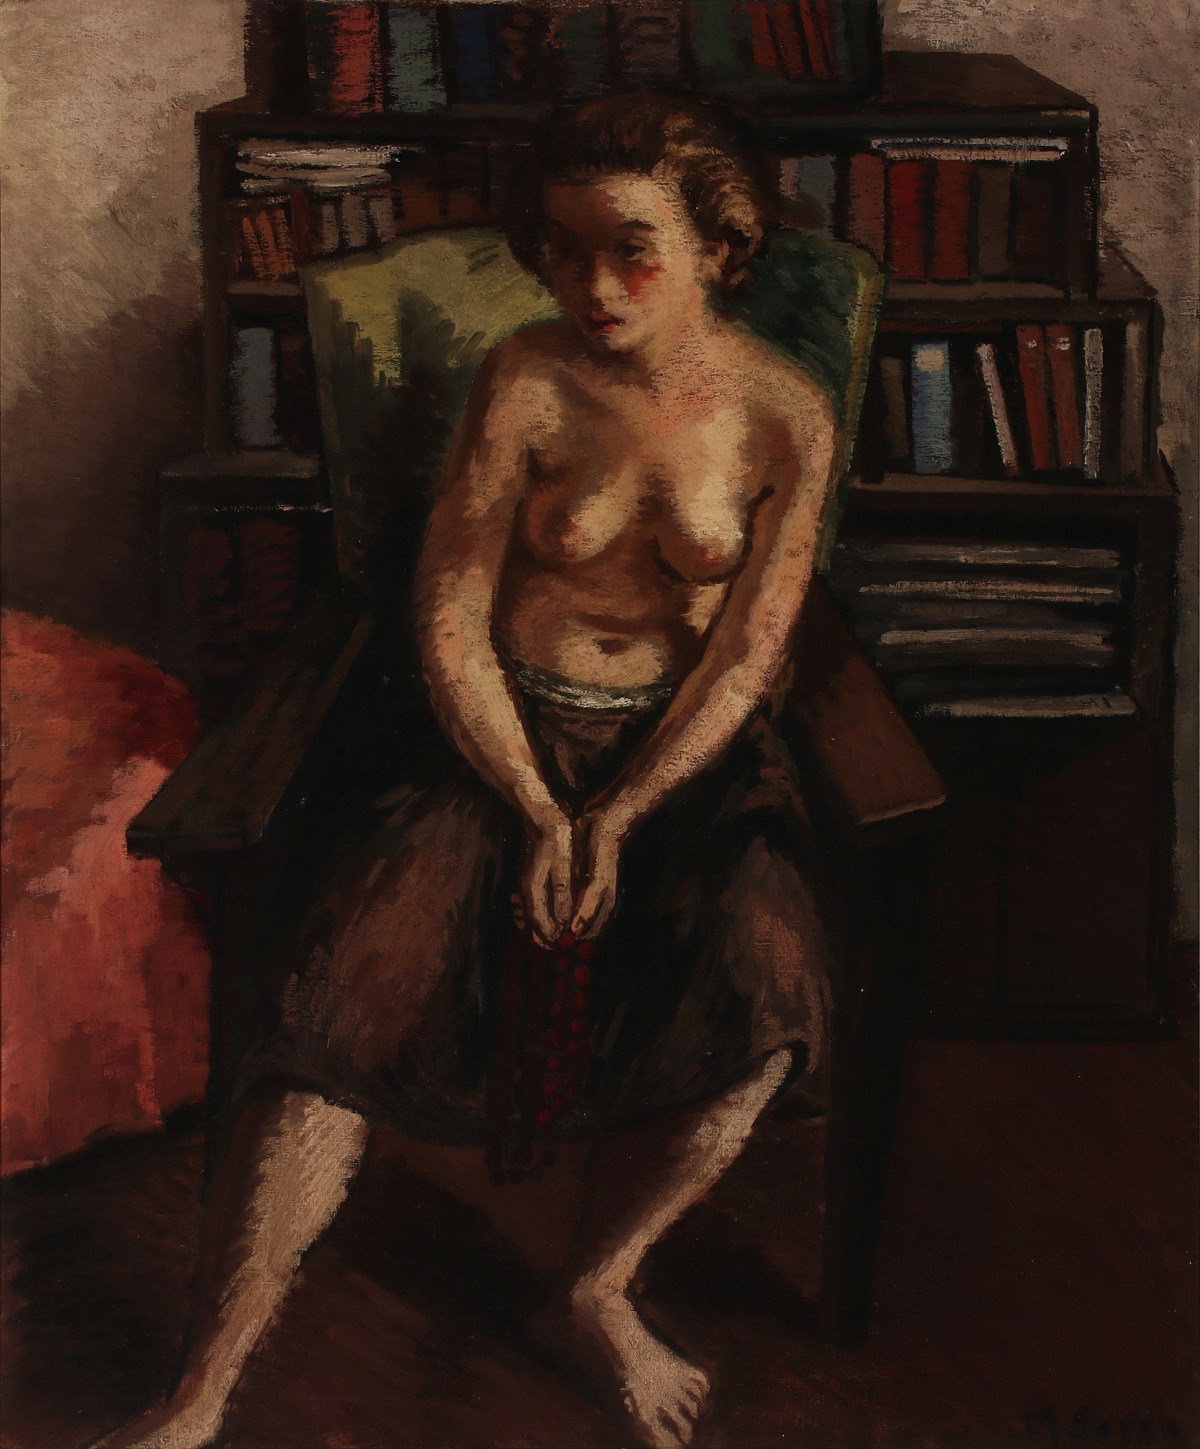 MOSES SOYER (1899-1974) EXHIBITED 1934 OIL ON CANVAS